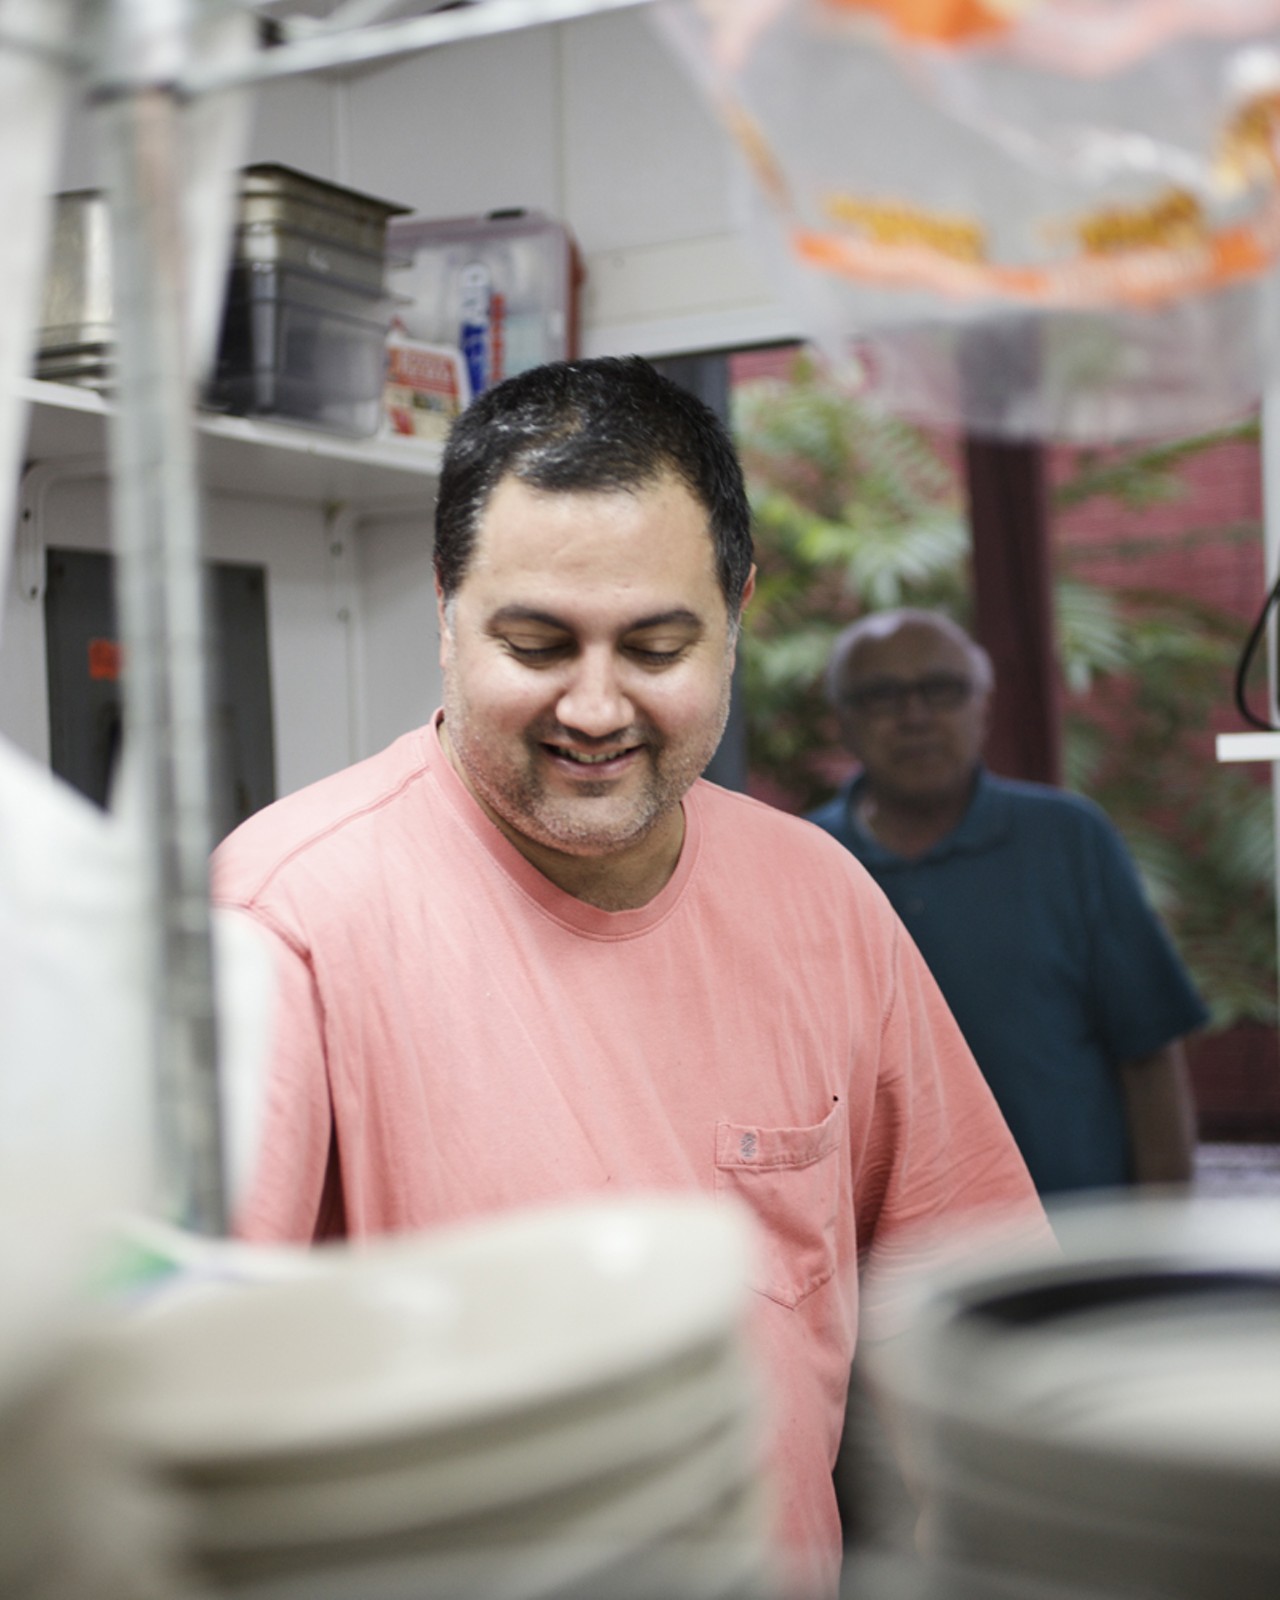 At work in the kitchen, New Orleans native and owner of Riverbend Restaurant & Bar, Sam Kogos.